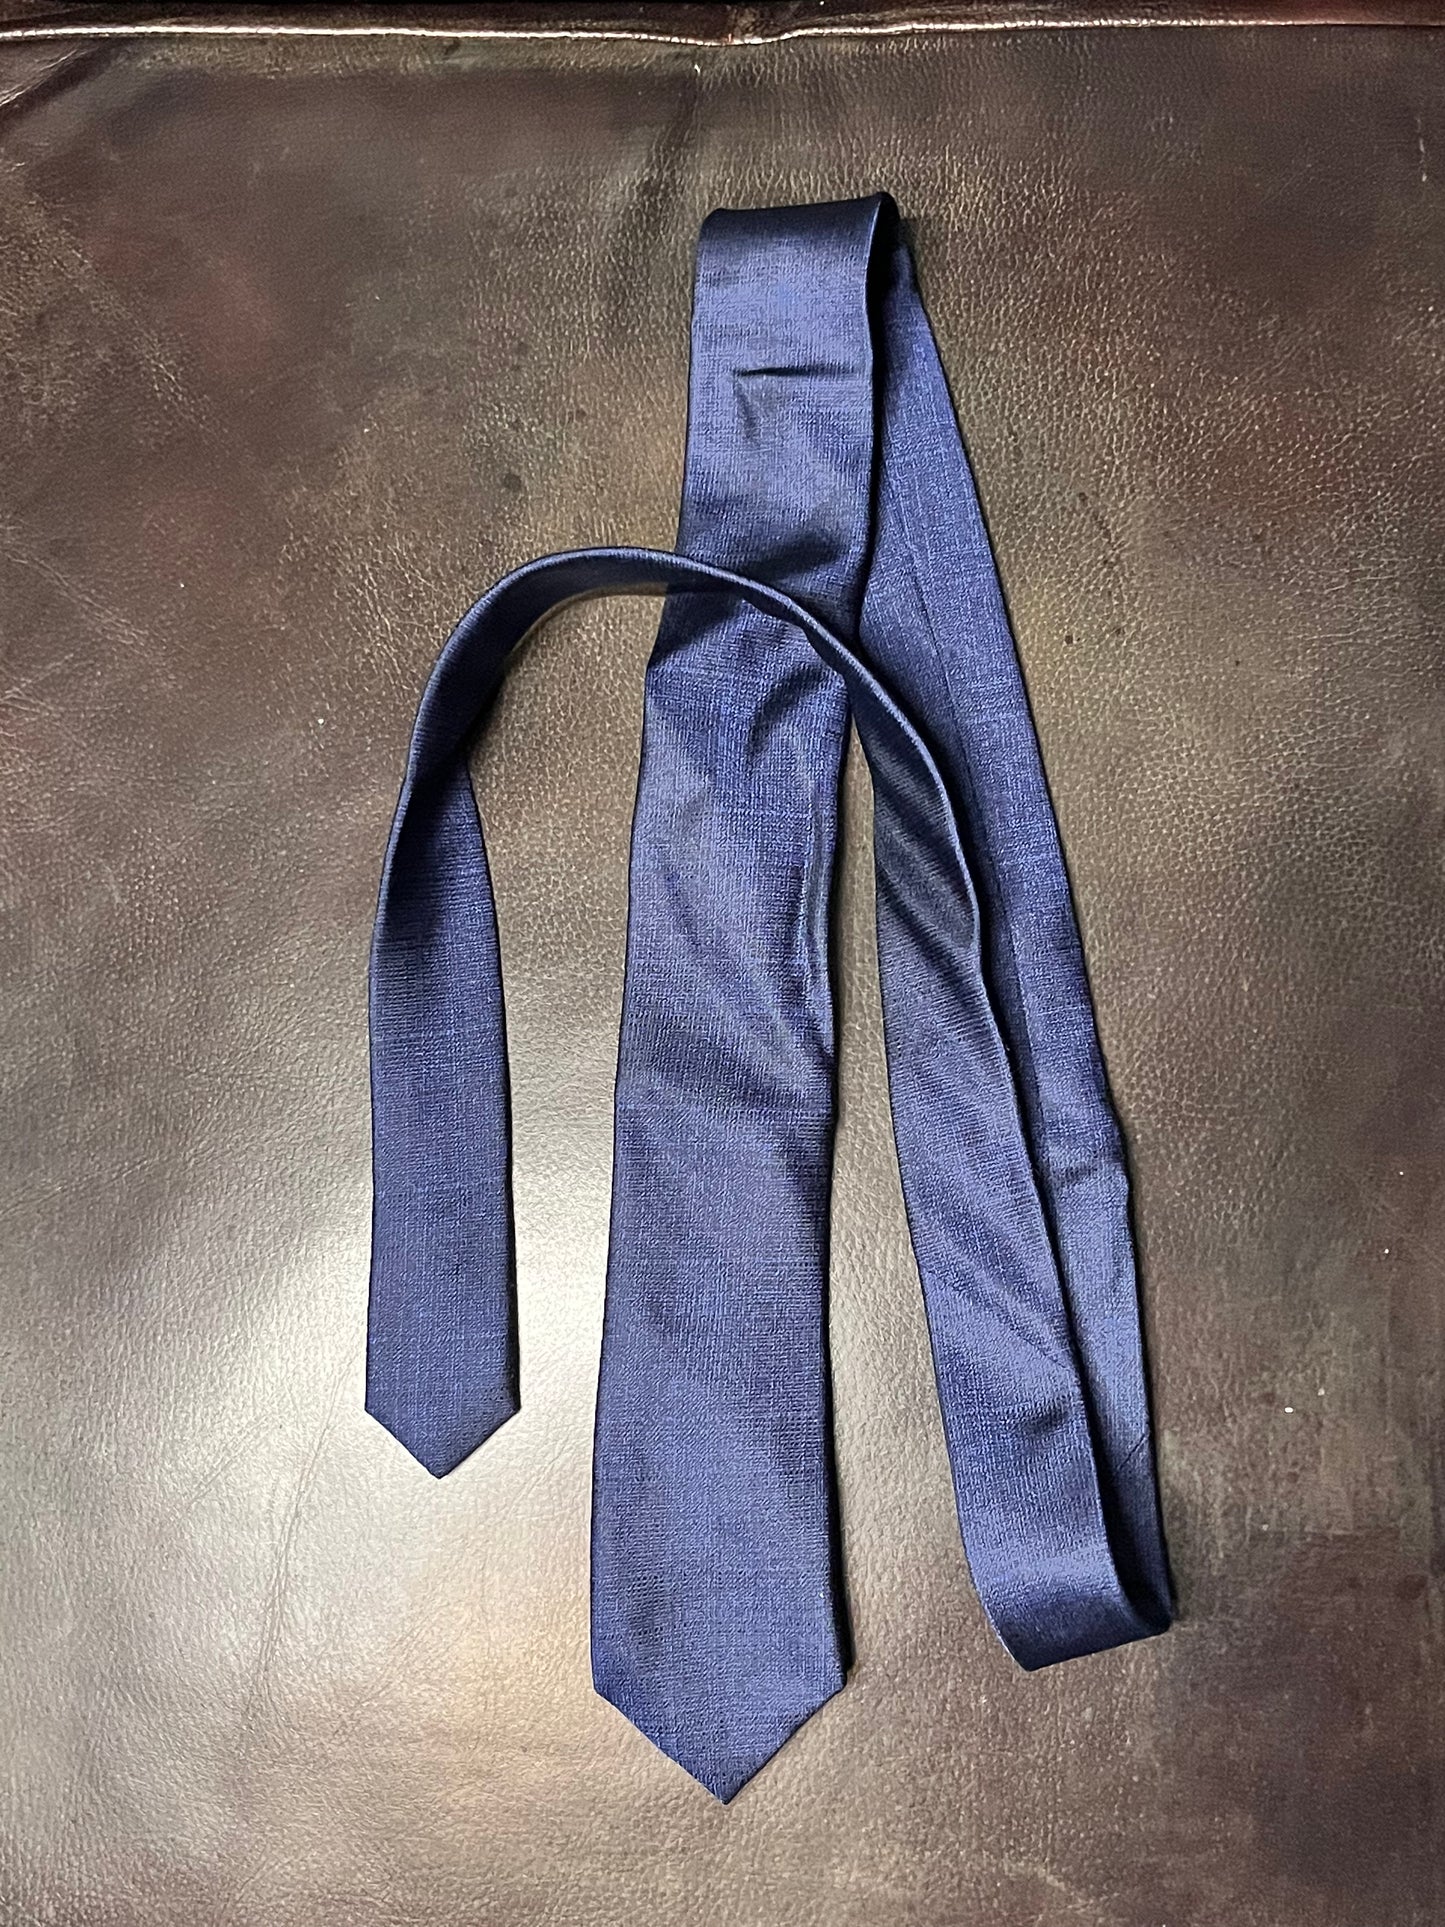 NEW GIRL: Schmidt's Italian Made Blue and Solid Blue Tie